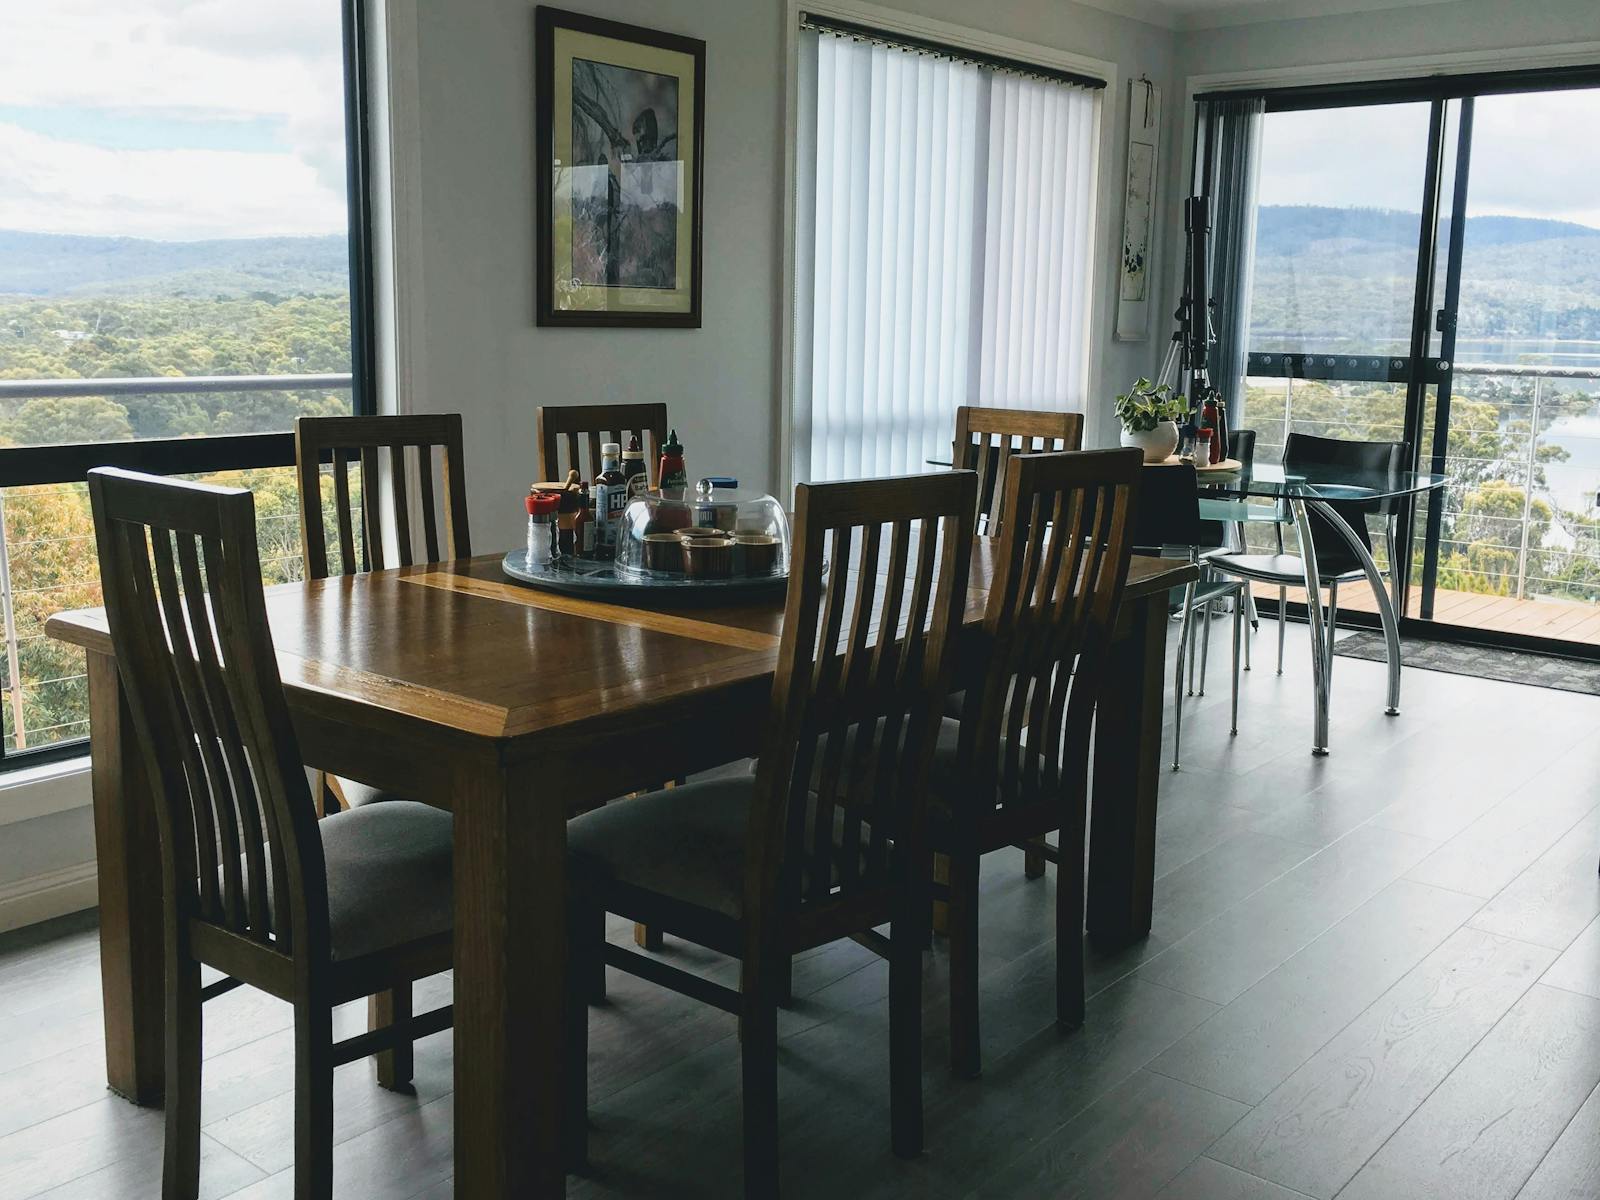 A welcoming dining area to enjoy a cooked breakfast and take in the views to Storm Bay and beyond.